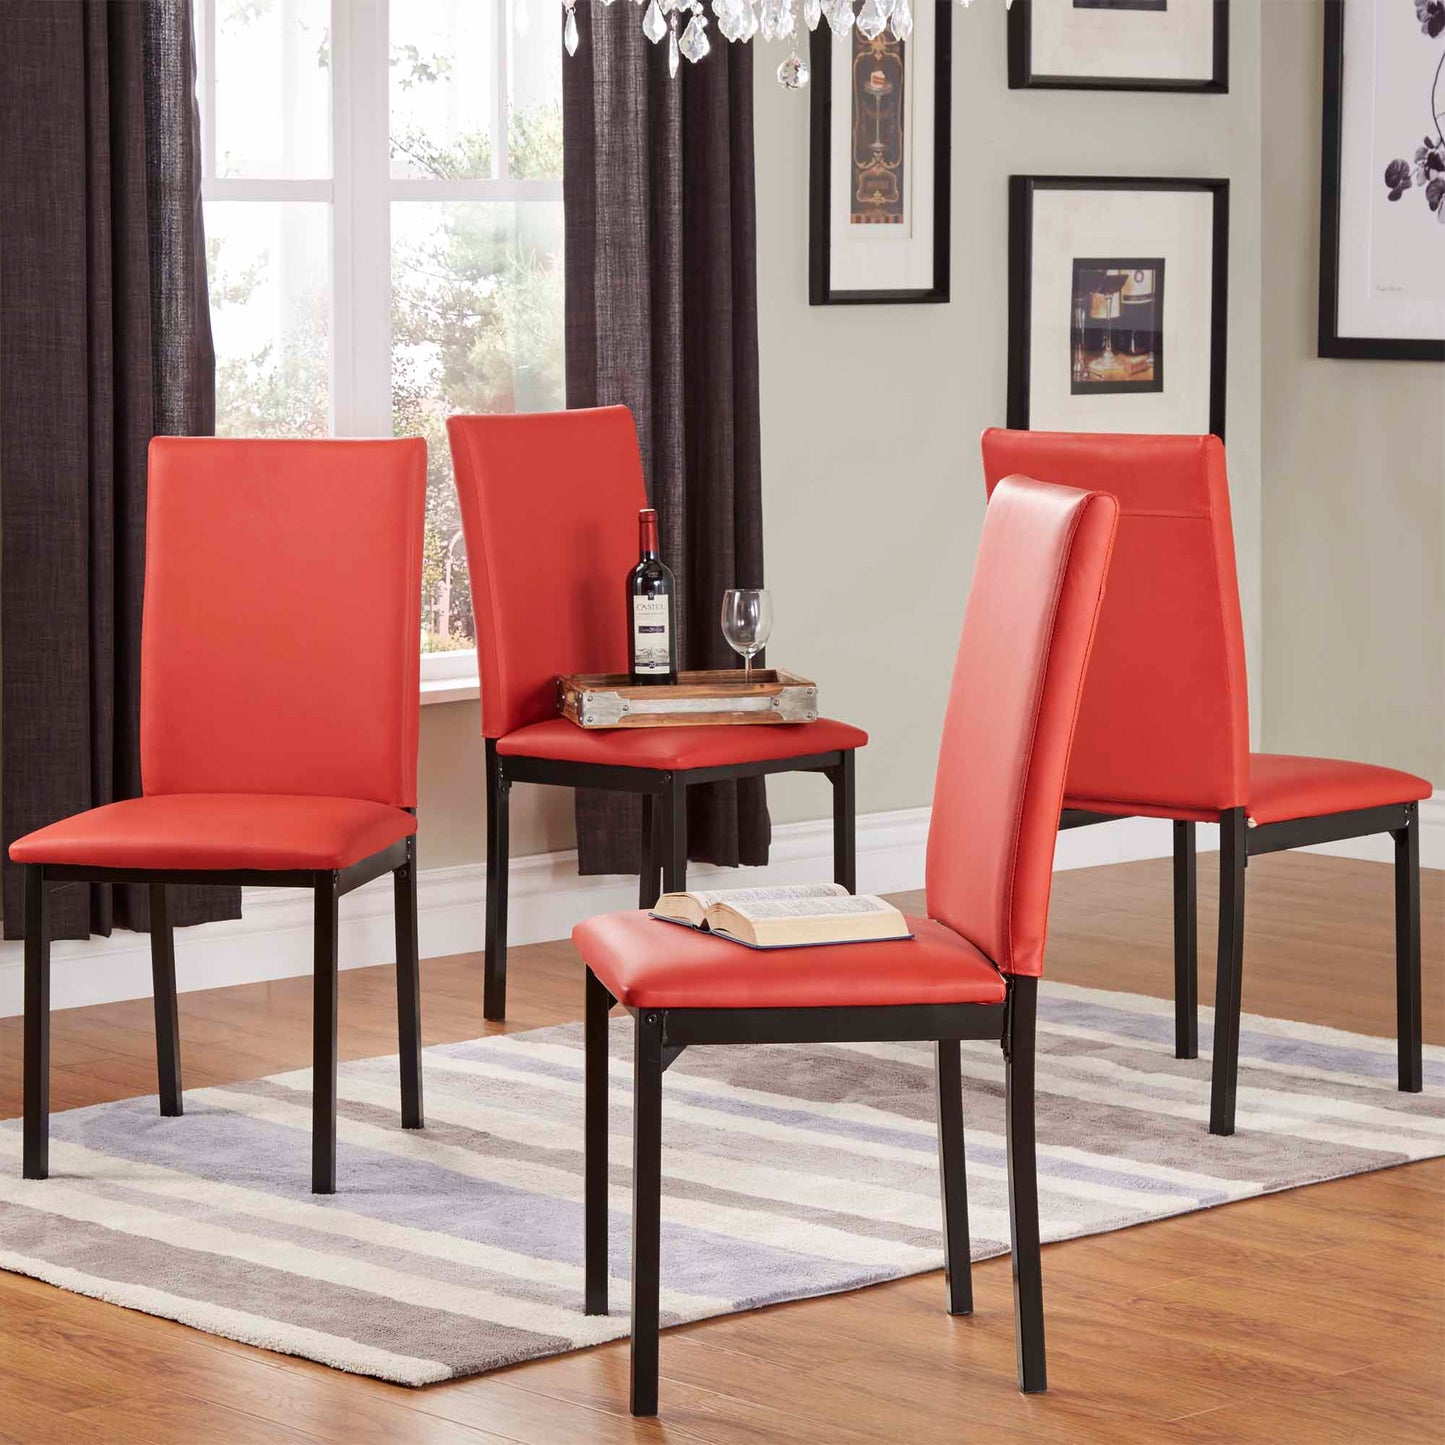 Metal Upholstered Dining Chairs - Red Faux Leather, Set of 4